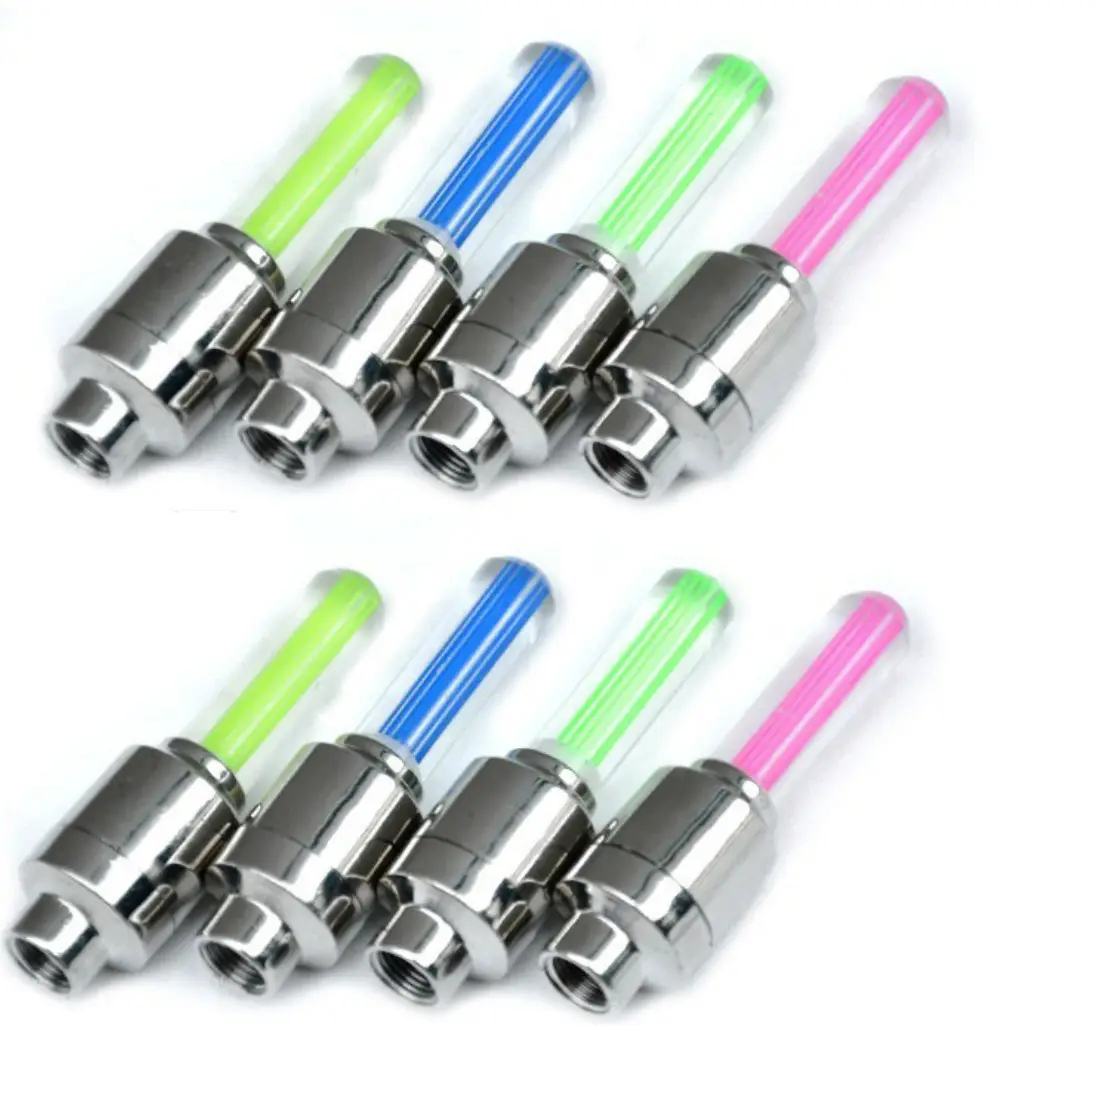 Colorful LED Flash Tyre Wheel Valve Light for Car Bike Bicycle Motorbicycle